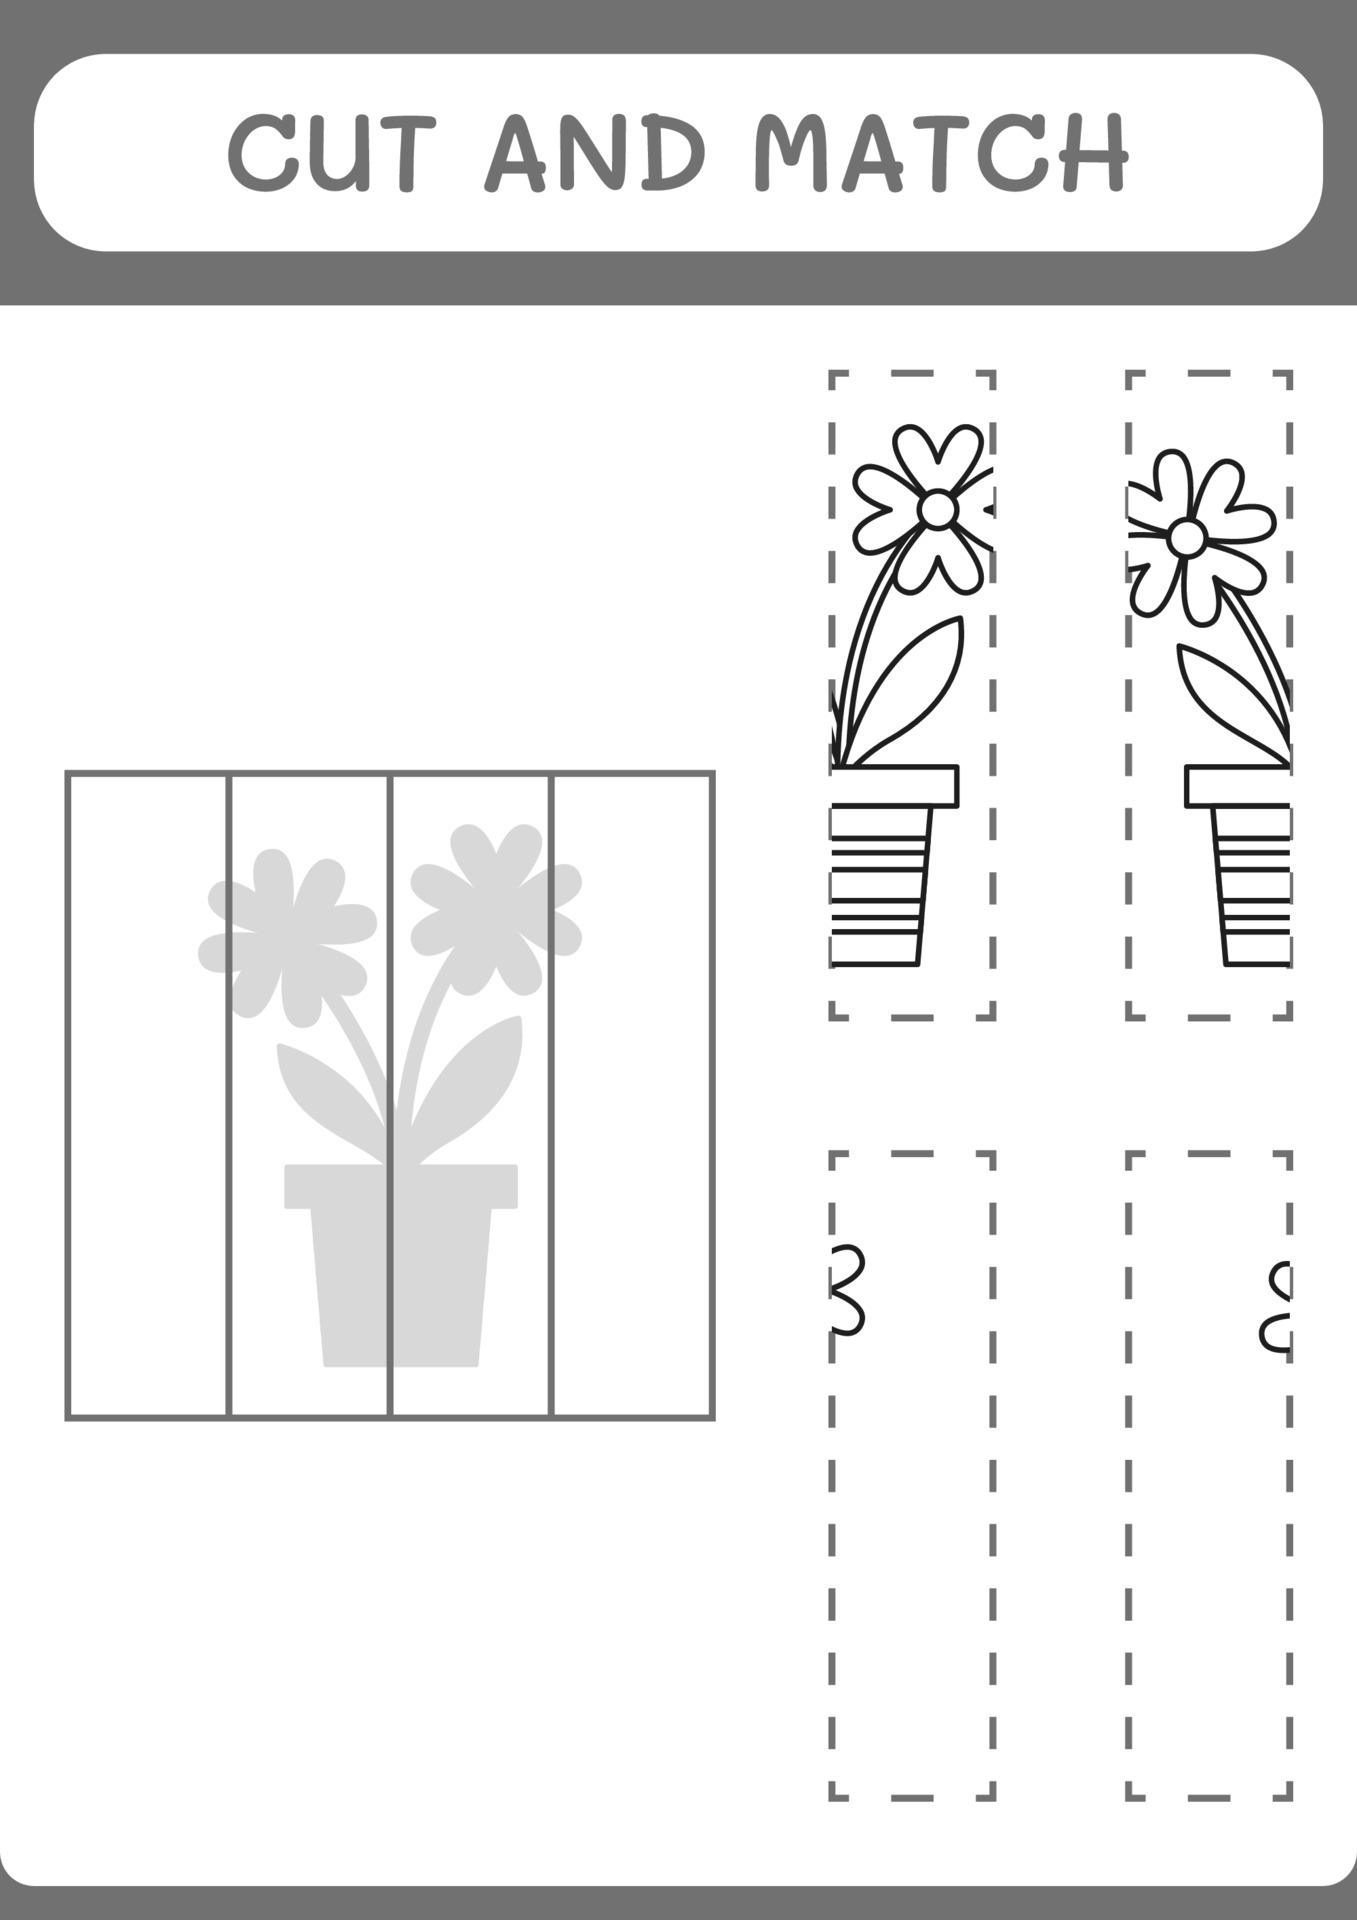 Cut and match parts of Flower, game for children. Vector illustration ...